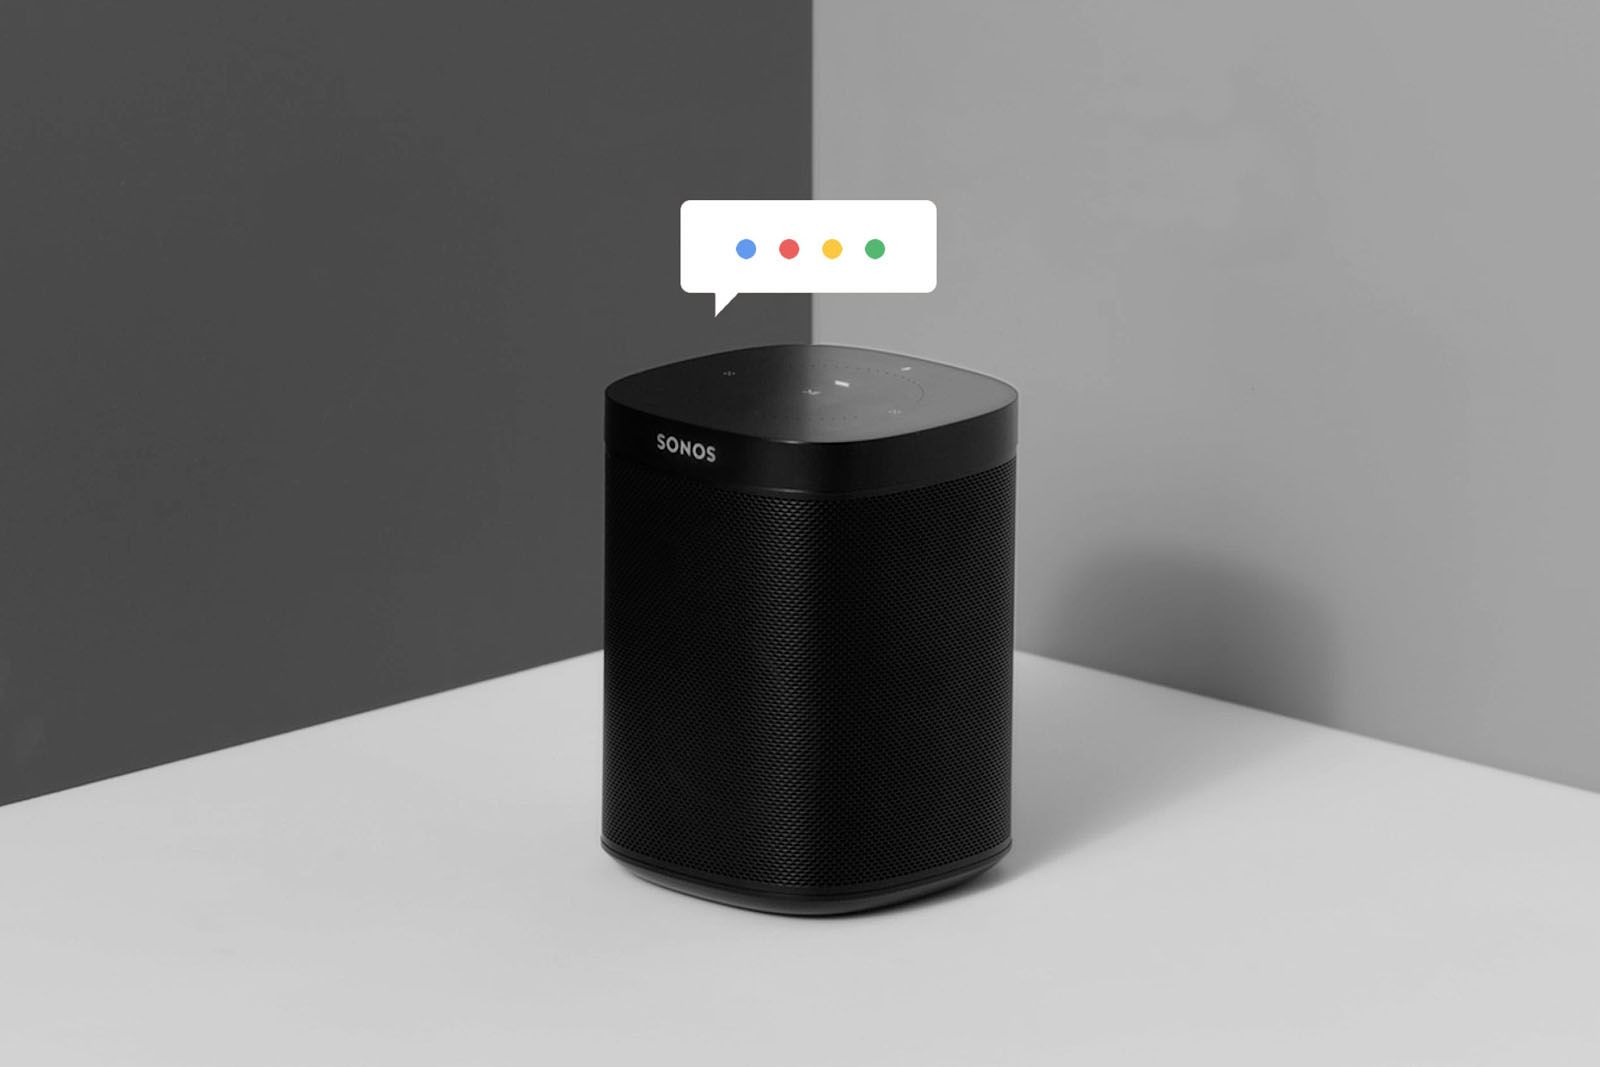 Interview Sonos Ceo Talks Ikea Collaboration Google Assistant And Future Of Company image 5